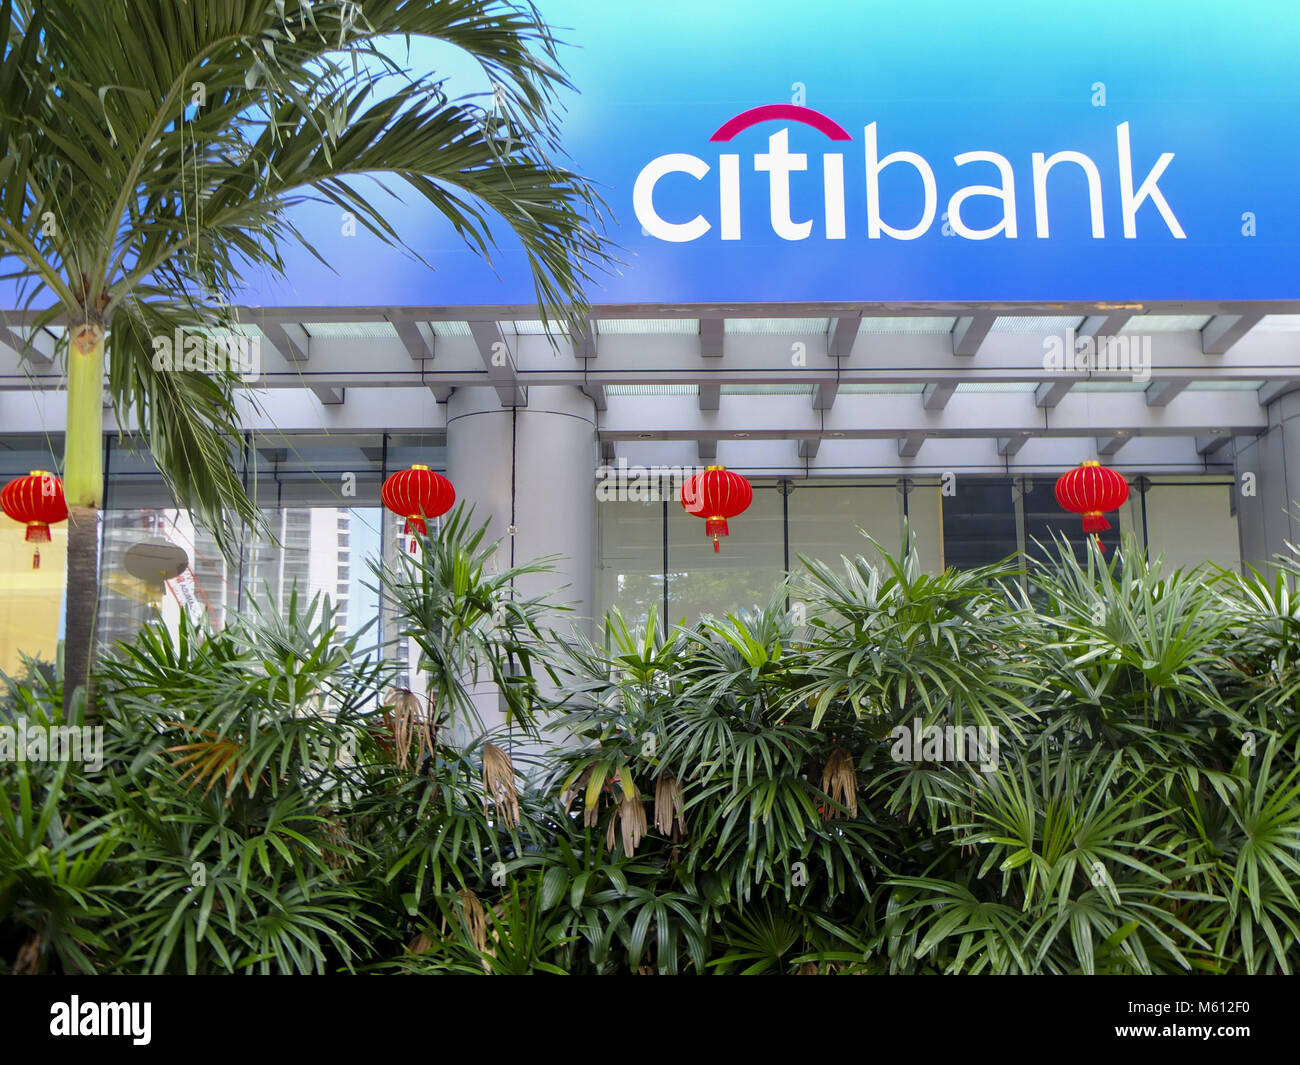 Kuala Lumpur, Malaysia. 28th Feb, 2018. Signboard of citibank is seen at Kuala Lumpur.Kuala Lumpur also known as KL to local people is the capital city of Malaysia and this urban city plays an important role for the Southeast Asia economic sector. It's also known to the world for its shopping and tourism as its attraction. Credit: F HDZQ KDL35.jpg/SOPA Images/ZUMA Wire/Alamy Live News Stock Photo